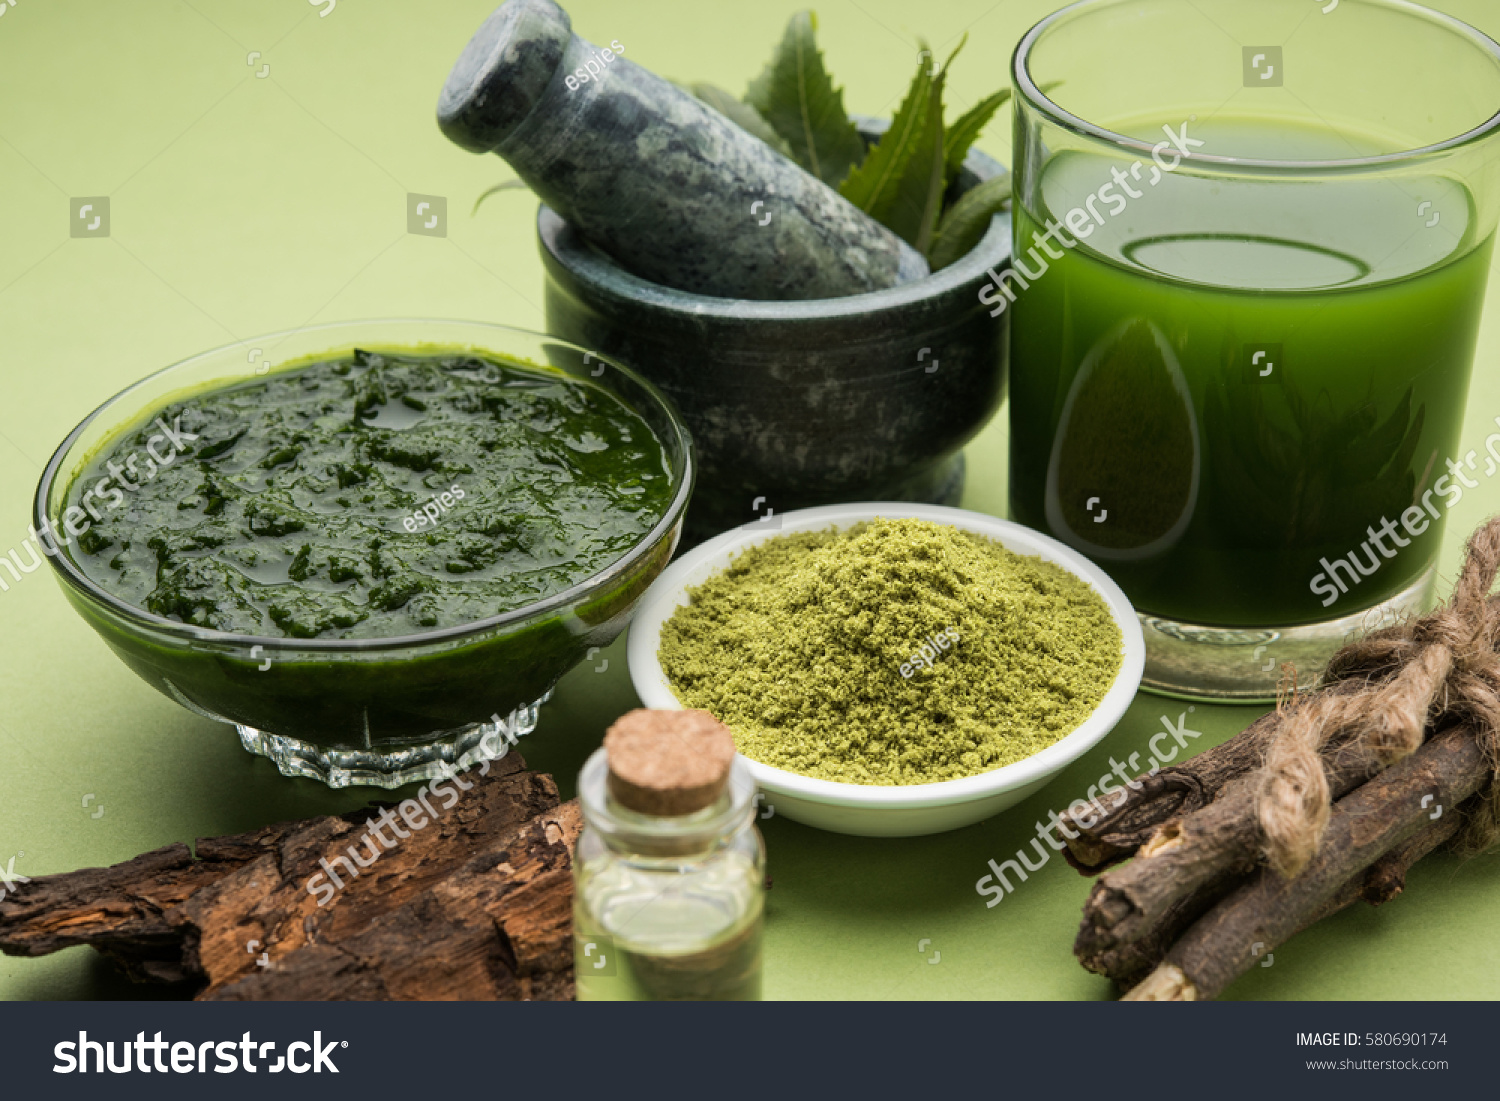 stock-photo-medicinal-ayurvedic-azadirachta-indica-or-neem-leaves-in-mortar-and-pestle-with-neem-paste-juice-580690174.jpg